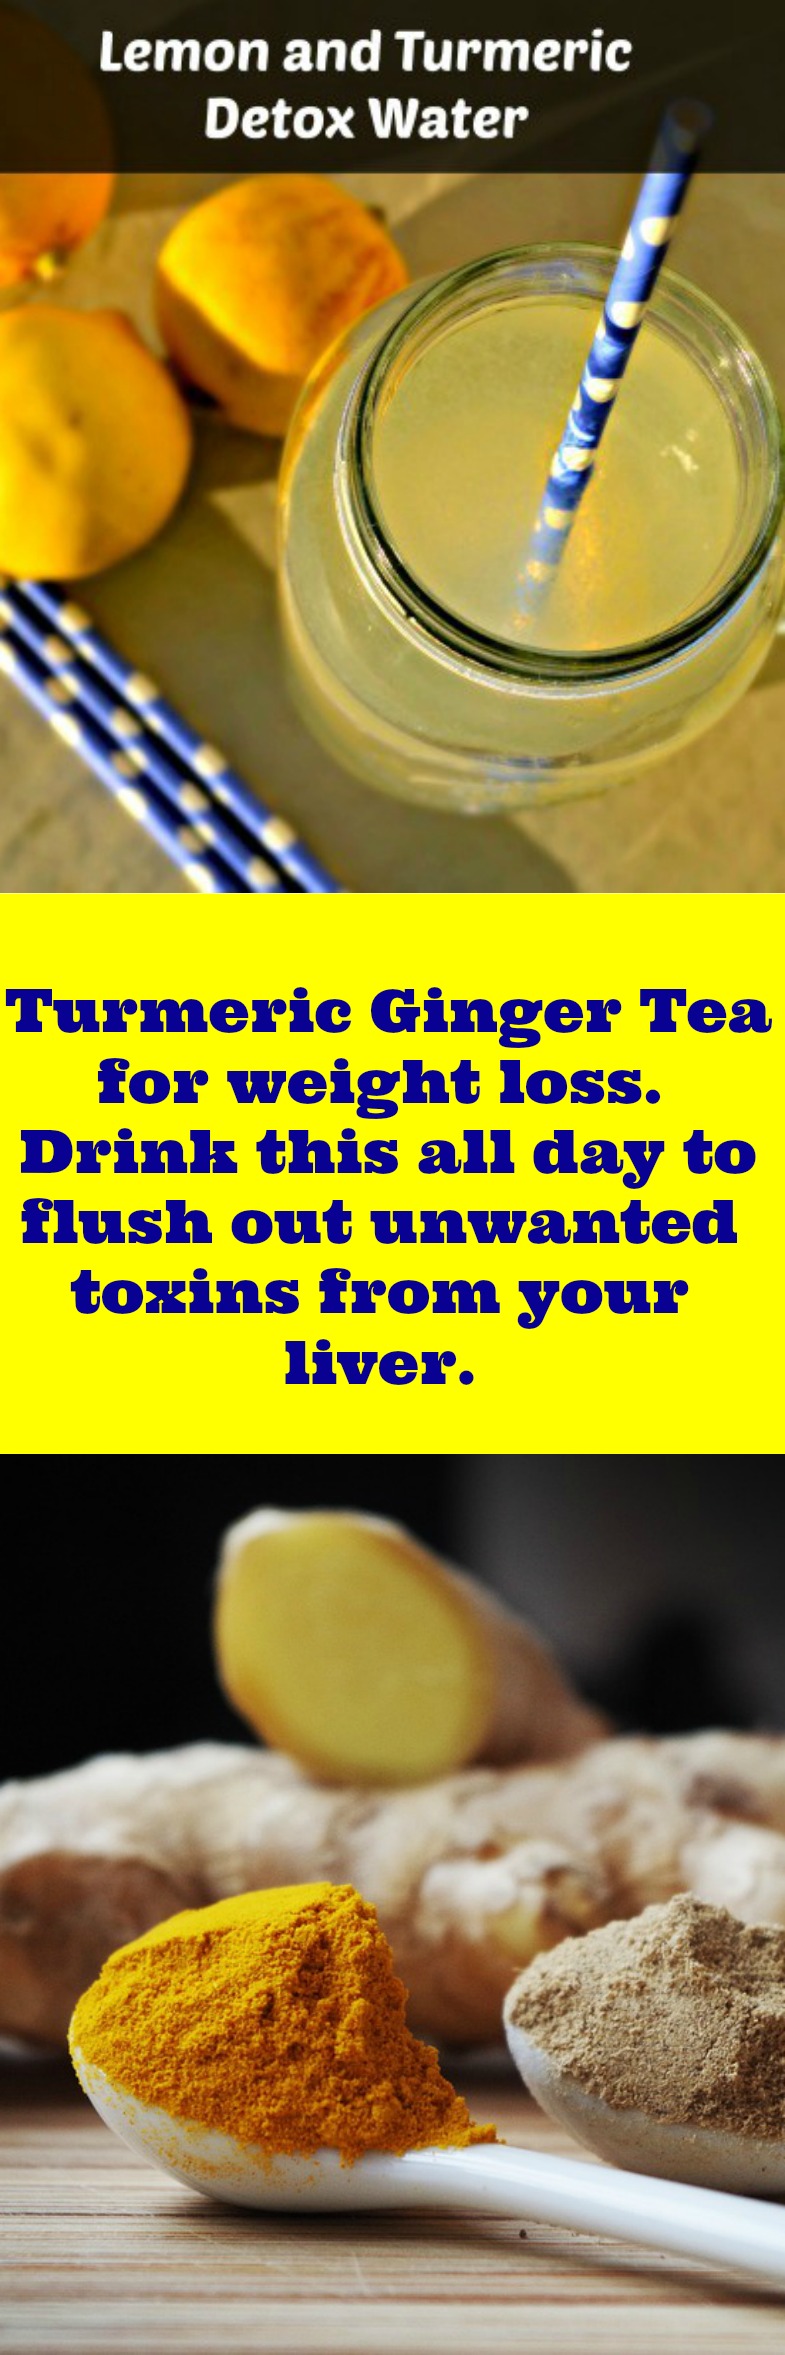 You need to try this Turmeric Ginger Tea for weight loss.  Drink this all day to flush out unwanted toxins from your liver.Cleanse and detox for weightloss. Lose weight and gain more energy.